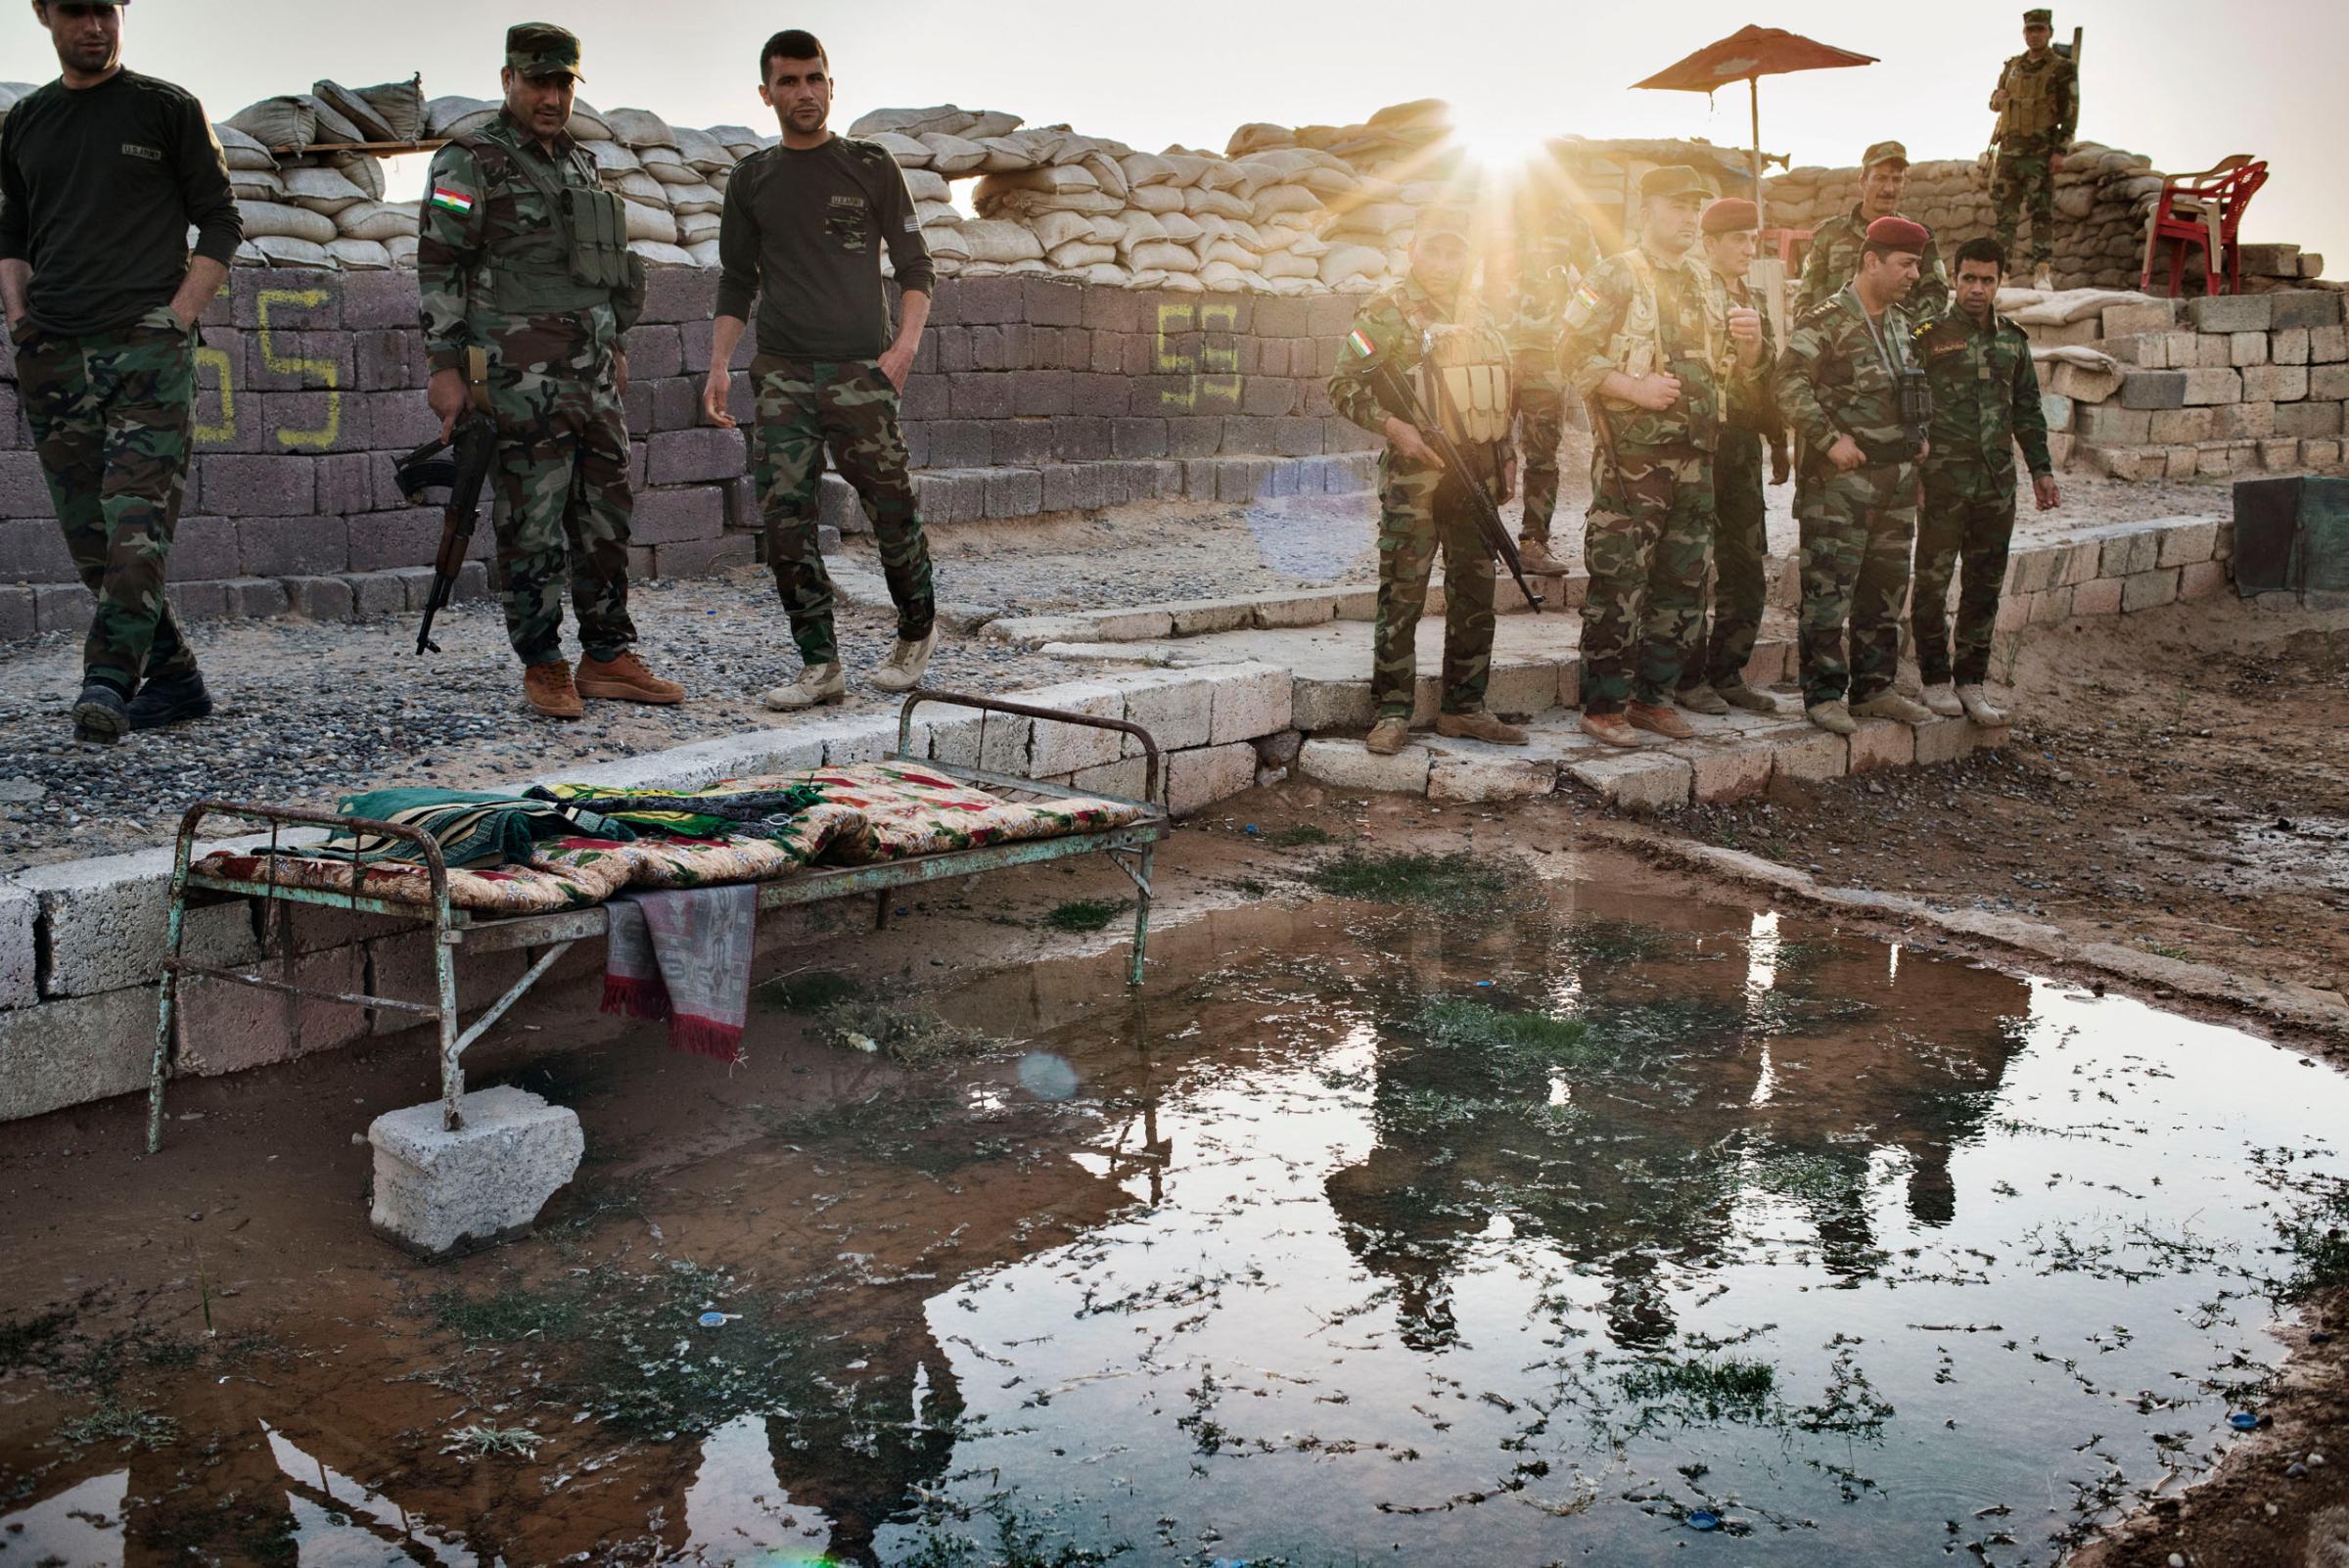 Kurdish Peshmerga at a small outpost near Makhmour, Kurdistan, northern Iraq, May 8, 2016. These fighters, many armed only with Russian AKs, blocked the ISIS advance into Kurdistan in 2014 after tens of thousands in the Iraqi Army that were trained and equipped with U.S. tanks and artillery fled, abandoning equipment and shedding their uniforms. In late 2015, the Peshmerga quietly opened their base in Makhmour.